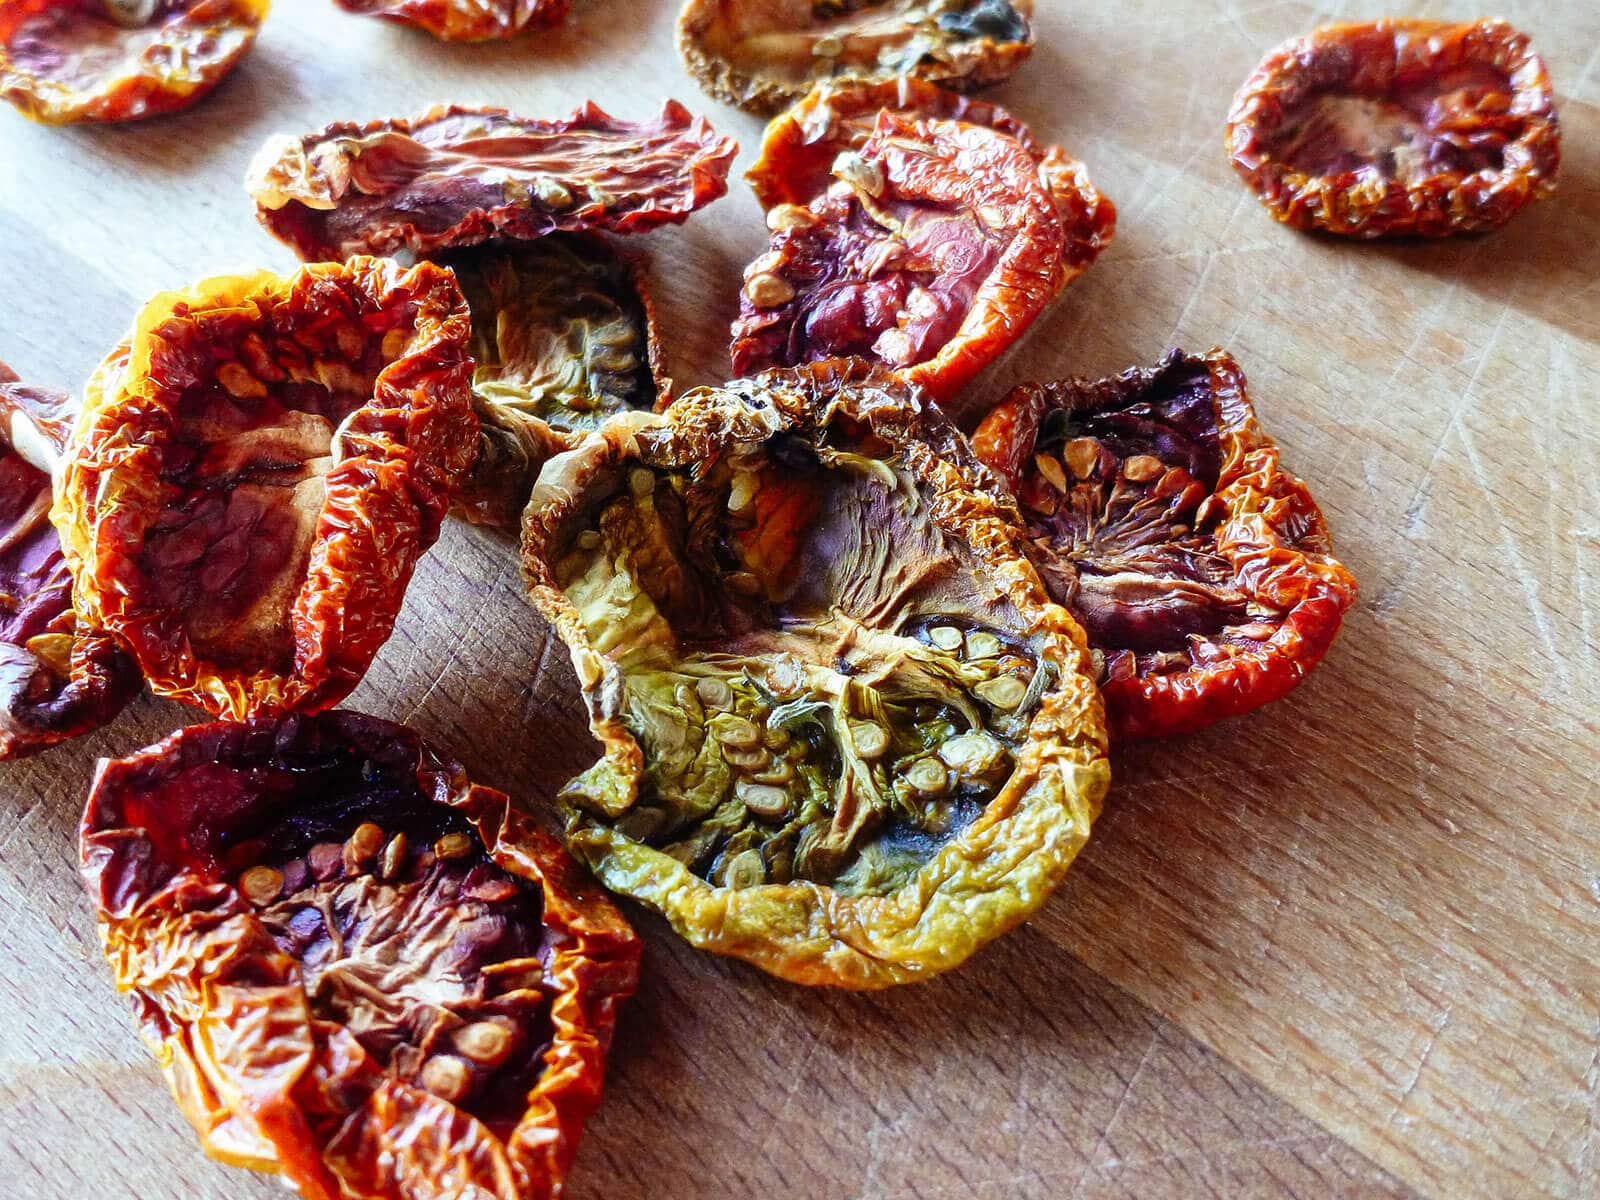 Colorful oven-dried heirloom tomatoes scattered across a butcher block